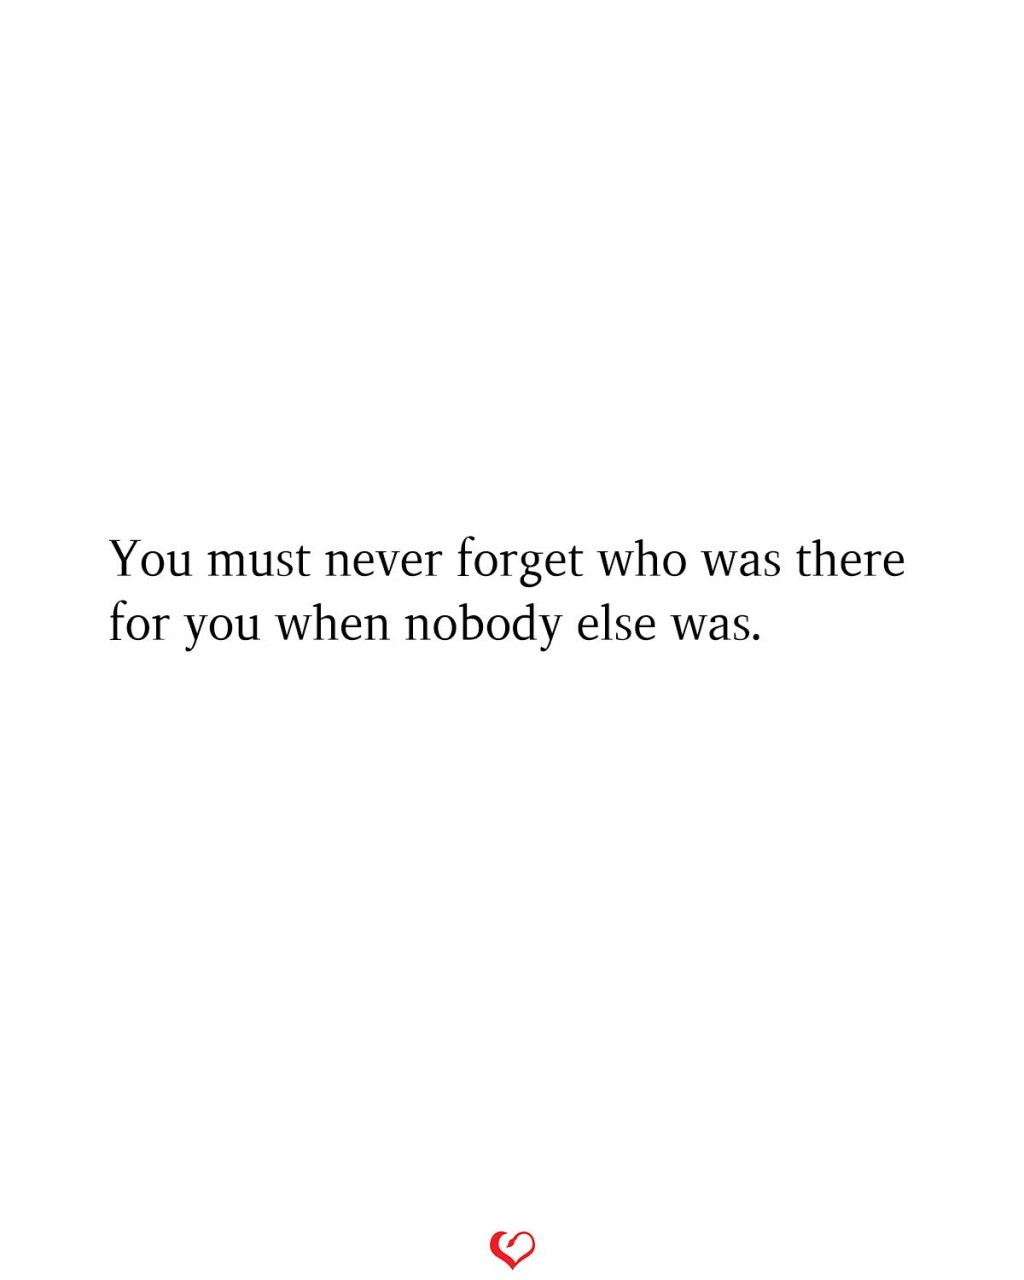 Picture of: You must never forget who was there for you when nobody else was